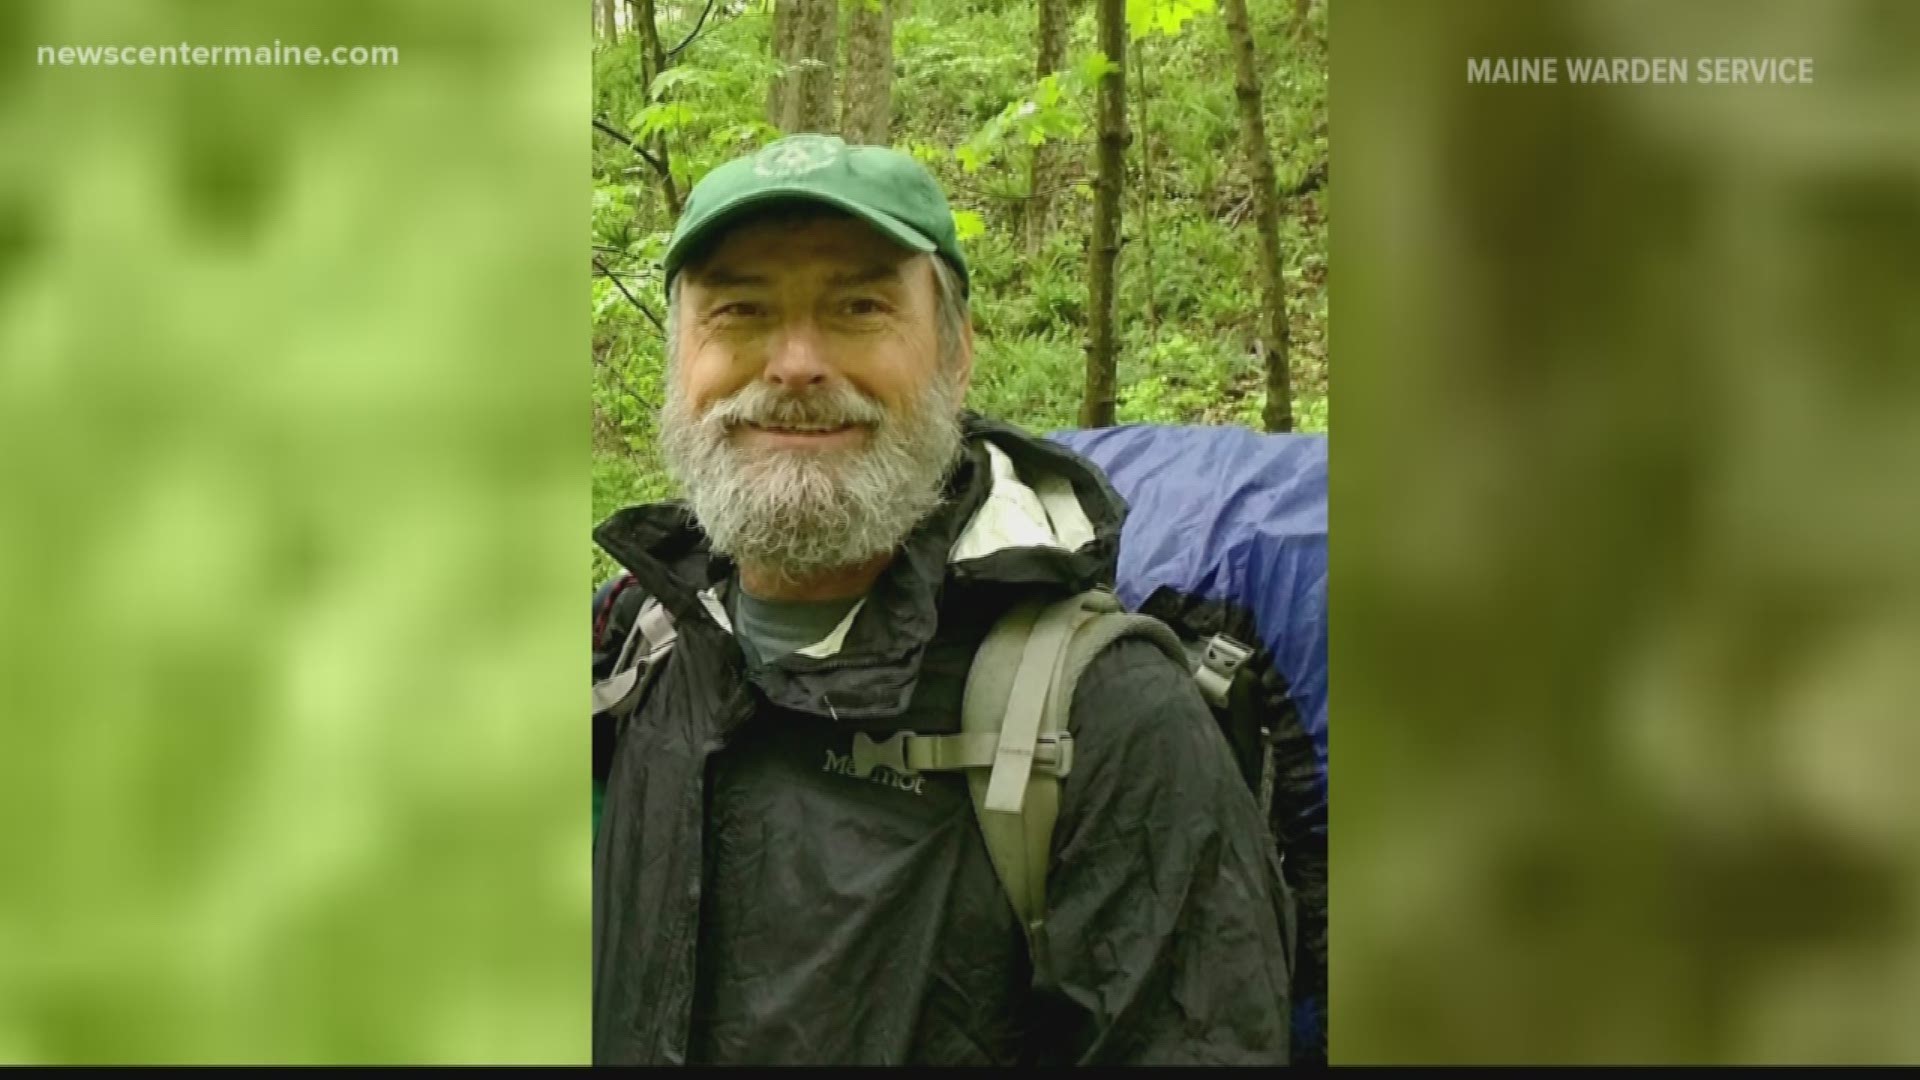 Jeffrey Aylward was found dead in his tent in Township D near the town of Rangely on Monday. Aylward was from Massachusetts and hadn't been heard from for more than a week.